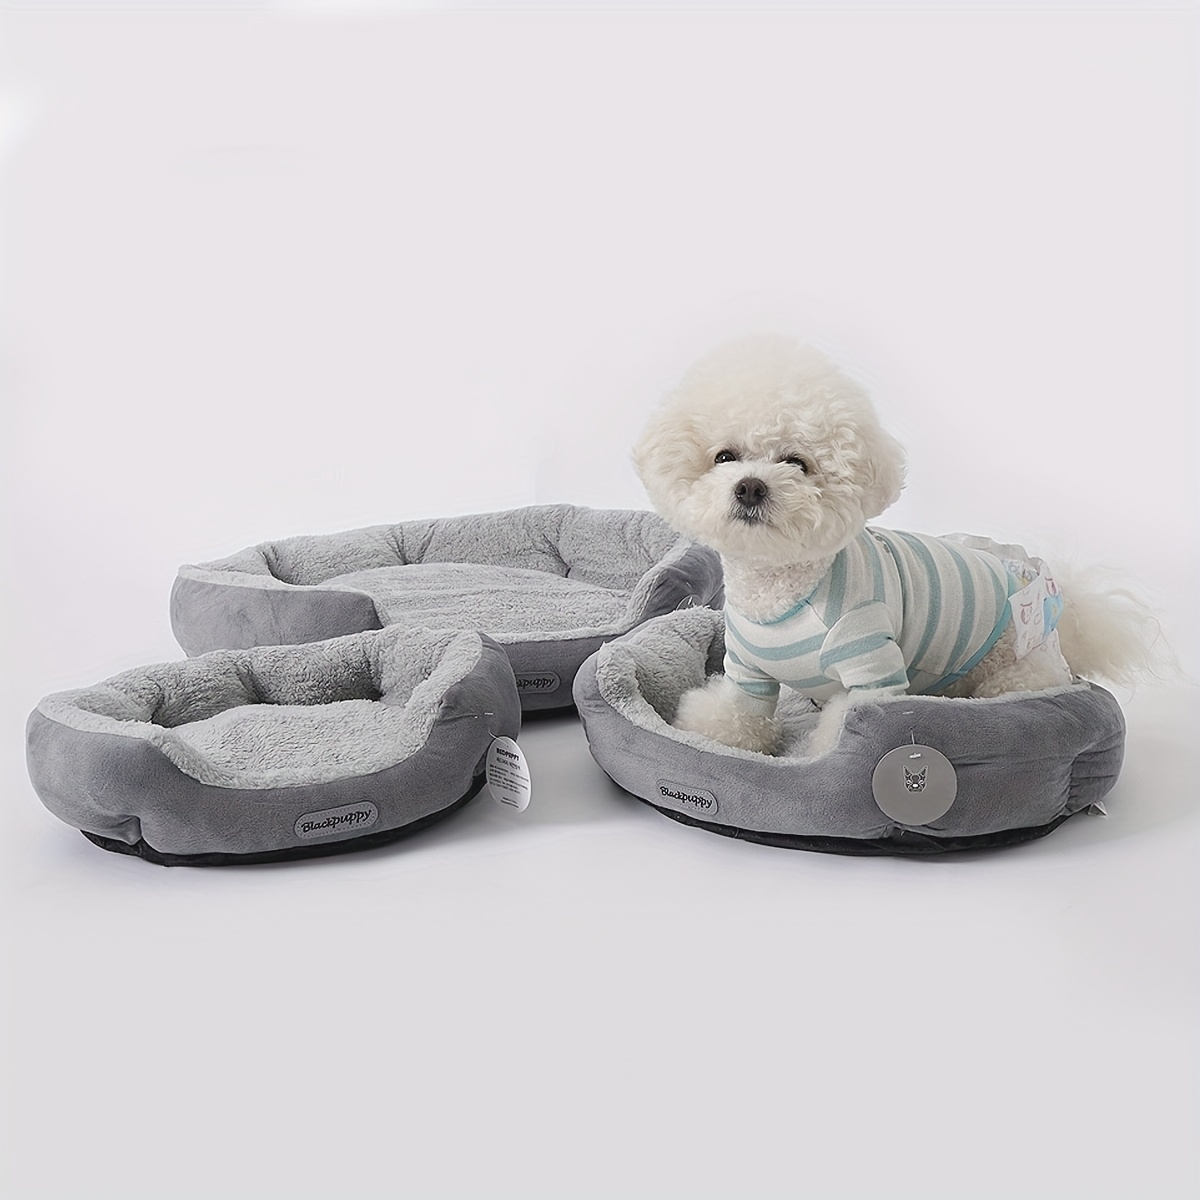 

Cozy Pet Travel Bed For Small And Medium Dogs - Soft And Comfortable Sleeping Nest For Cats And Dogs - Perfect For Home And On-the-go Use